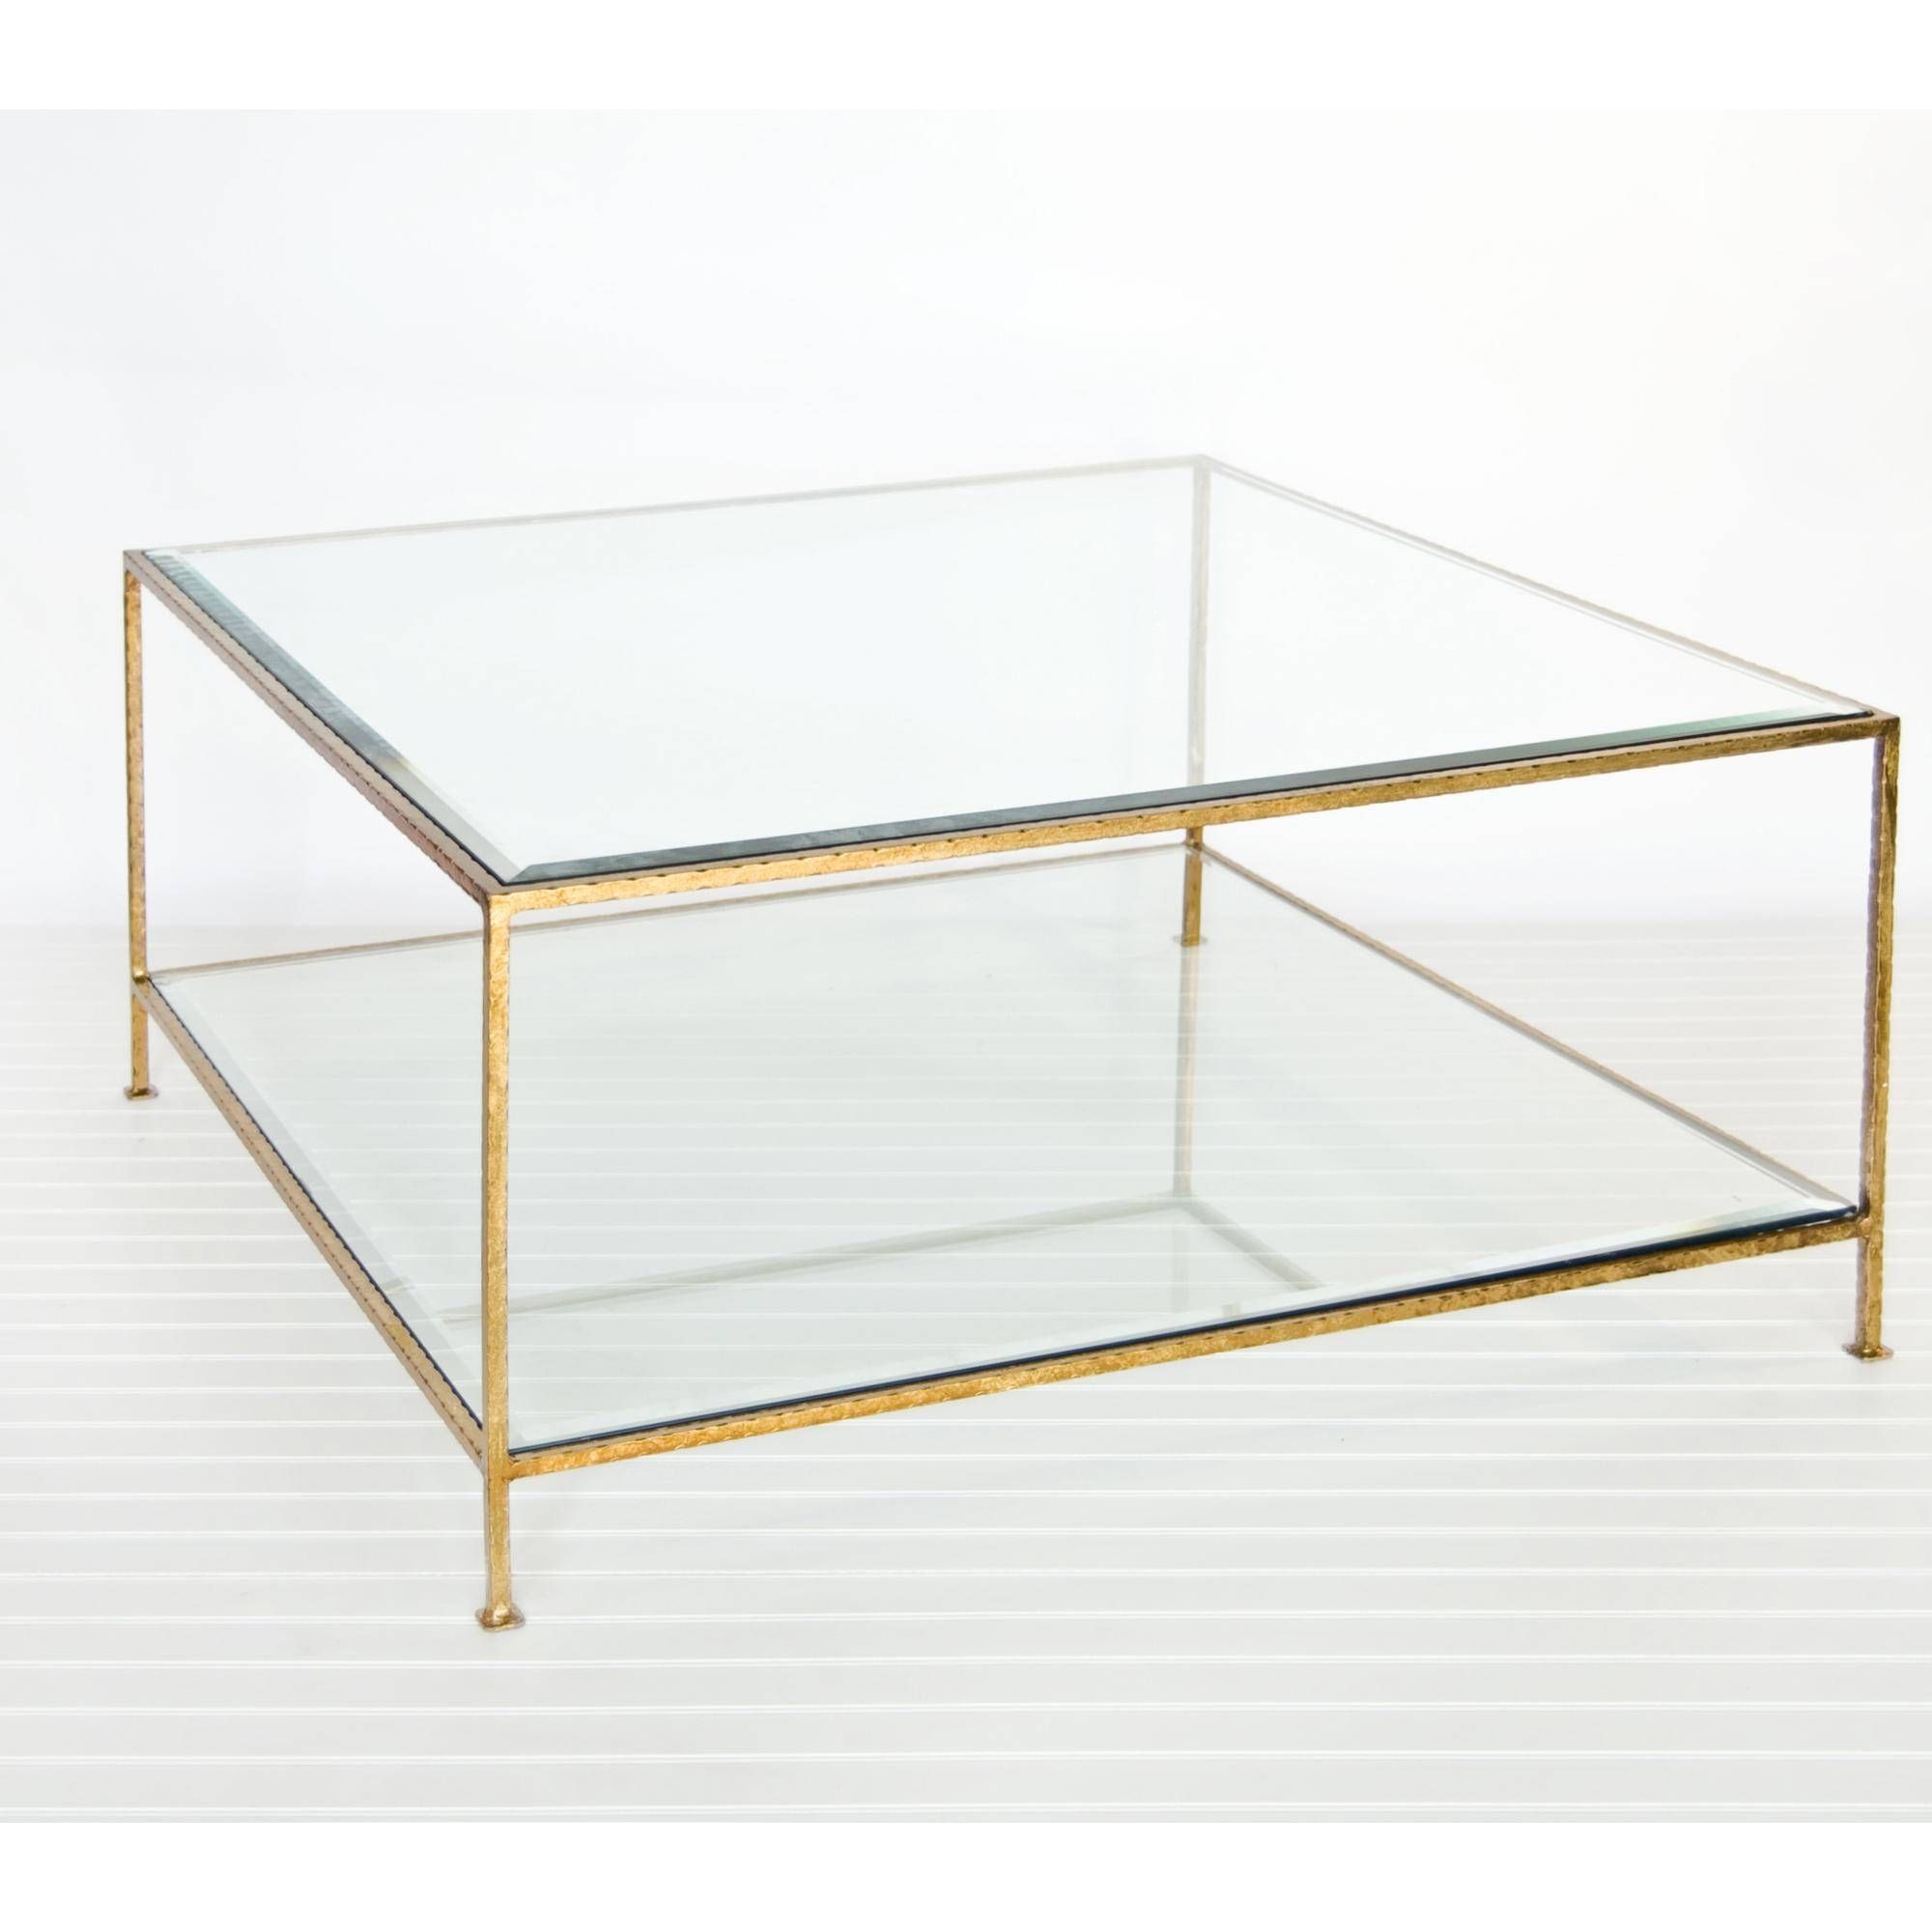 Coffee Table: Terrific Coffee Table Dimensions Standard Height Of Within Glass Coffee Table With Shelf (View 8 of 15)